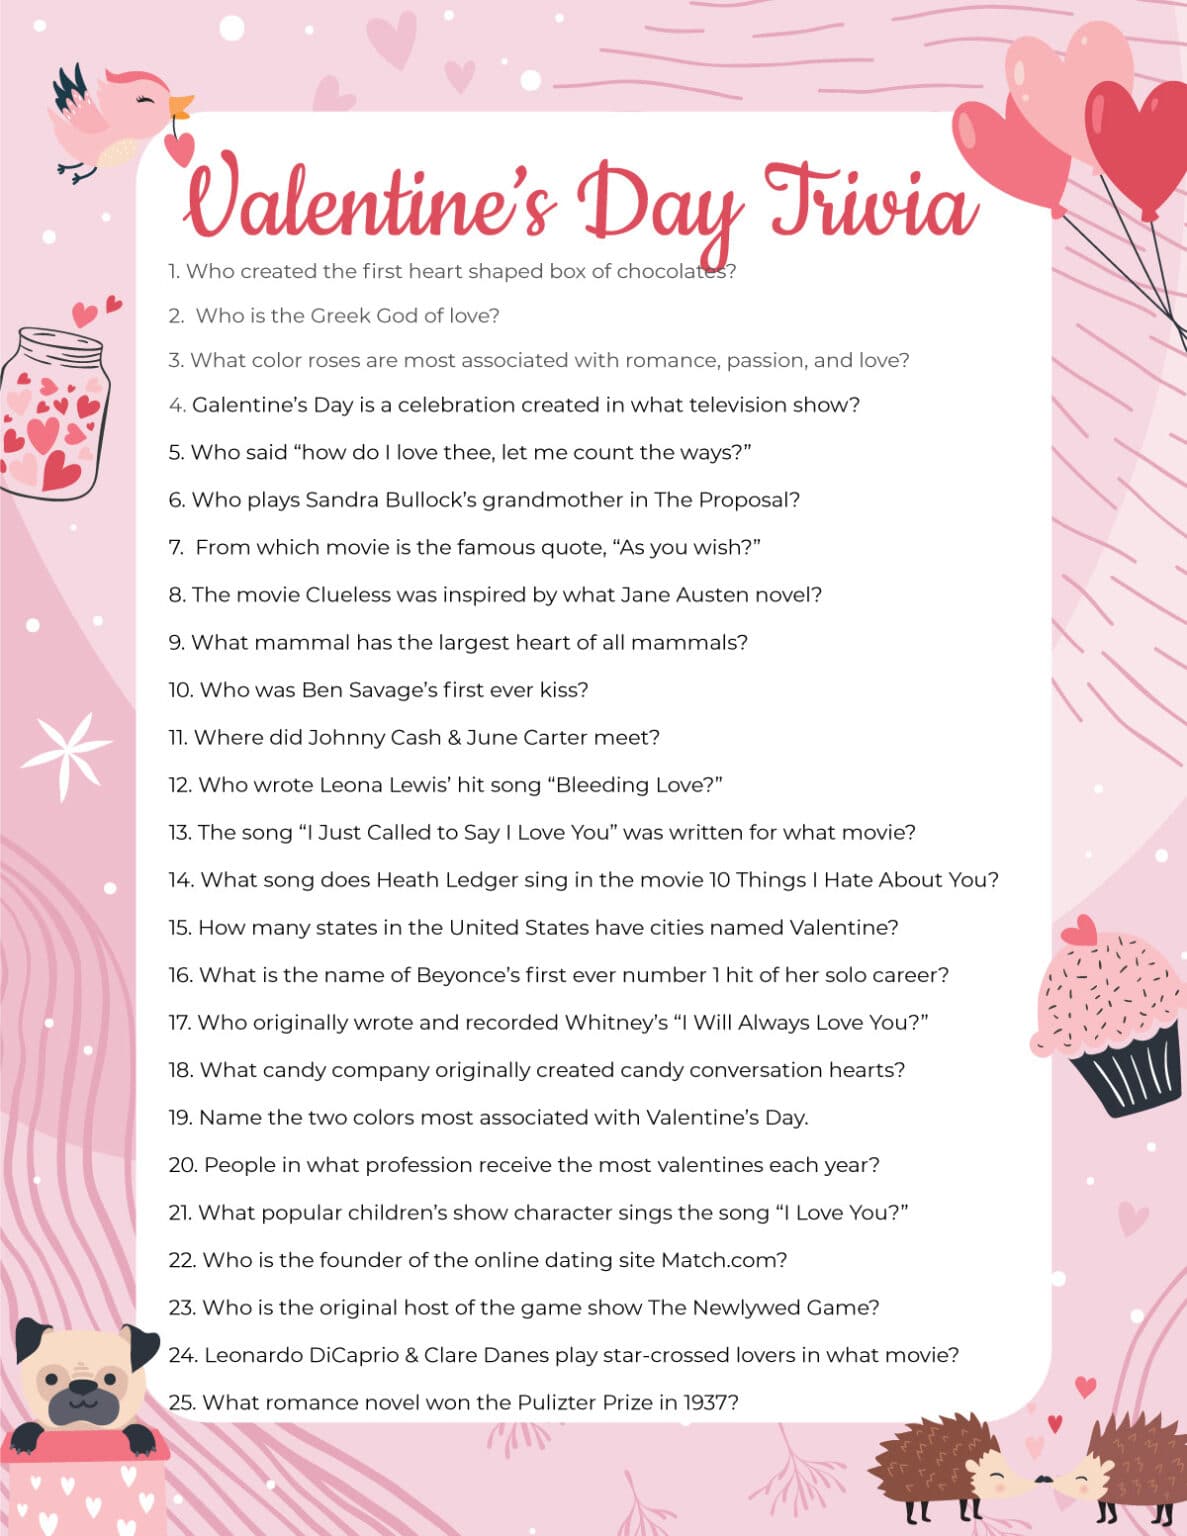 valentines-day-trivia-questions-and-answers-printable-printable-word